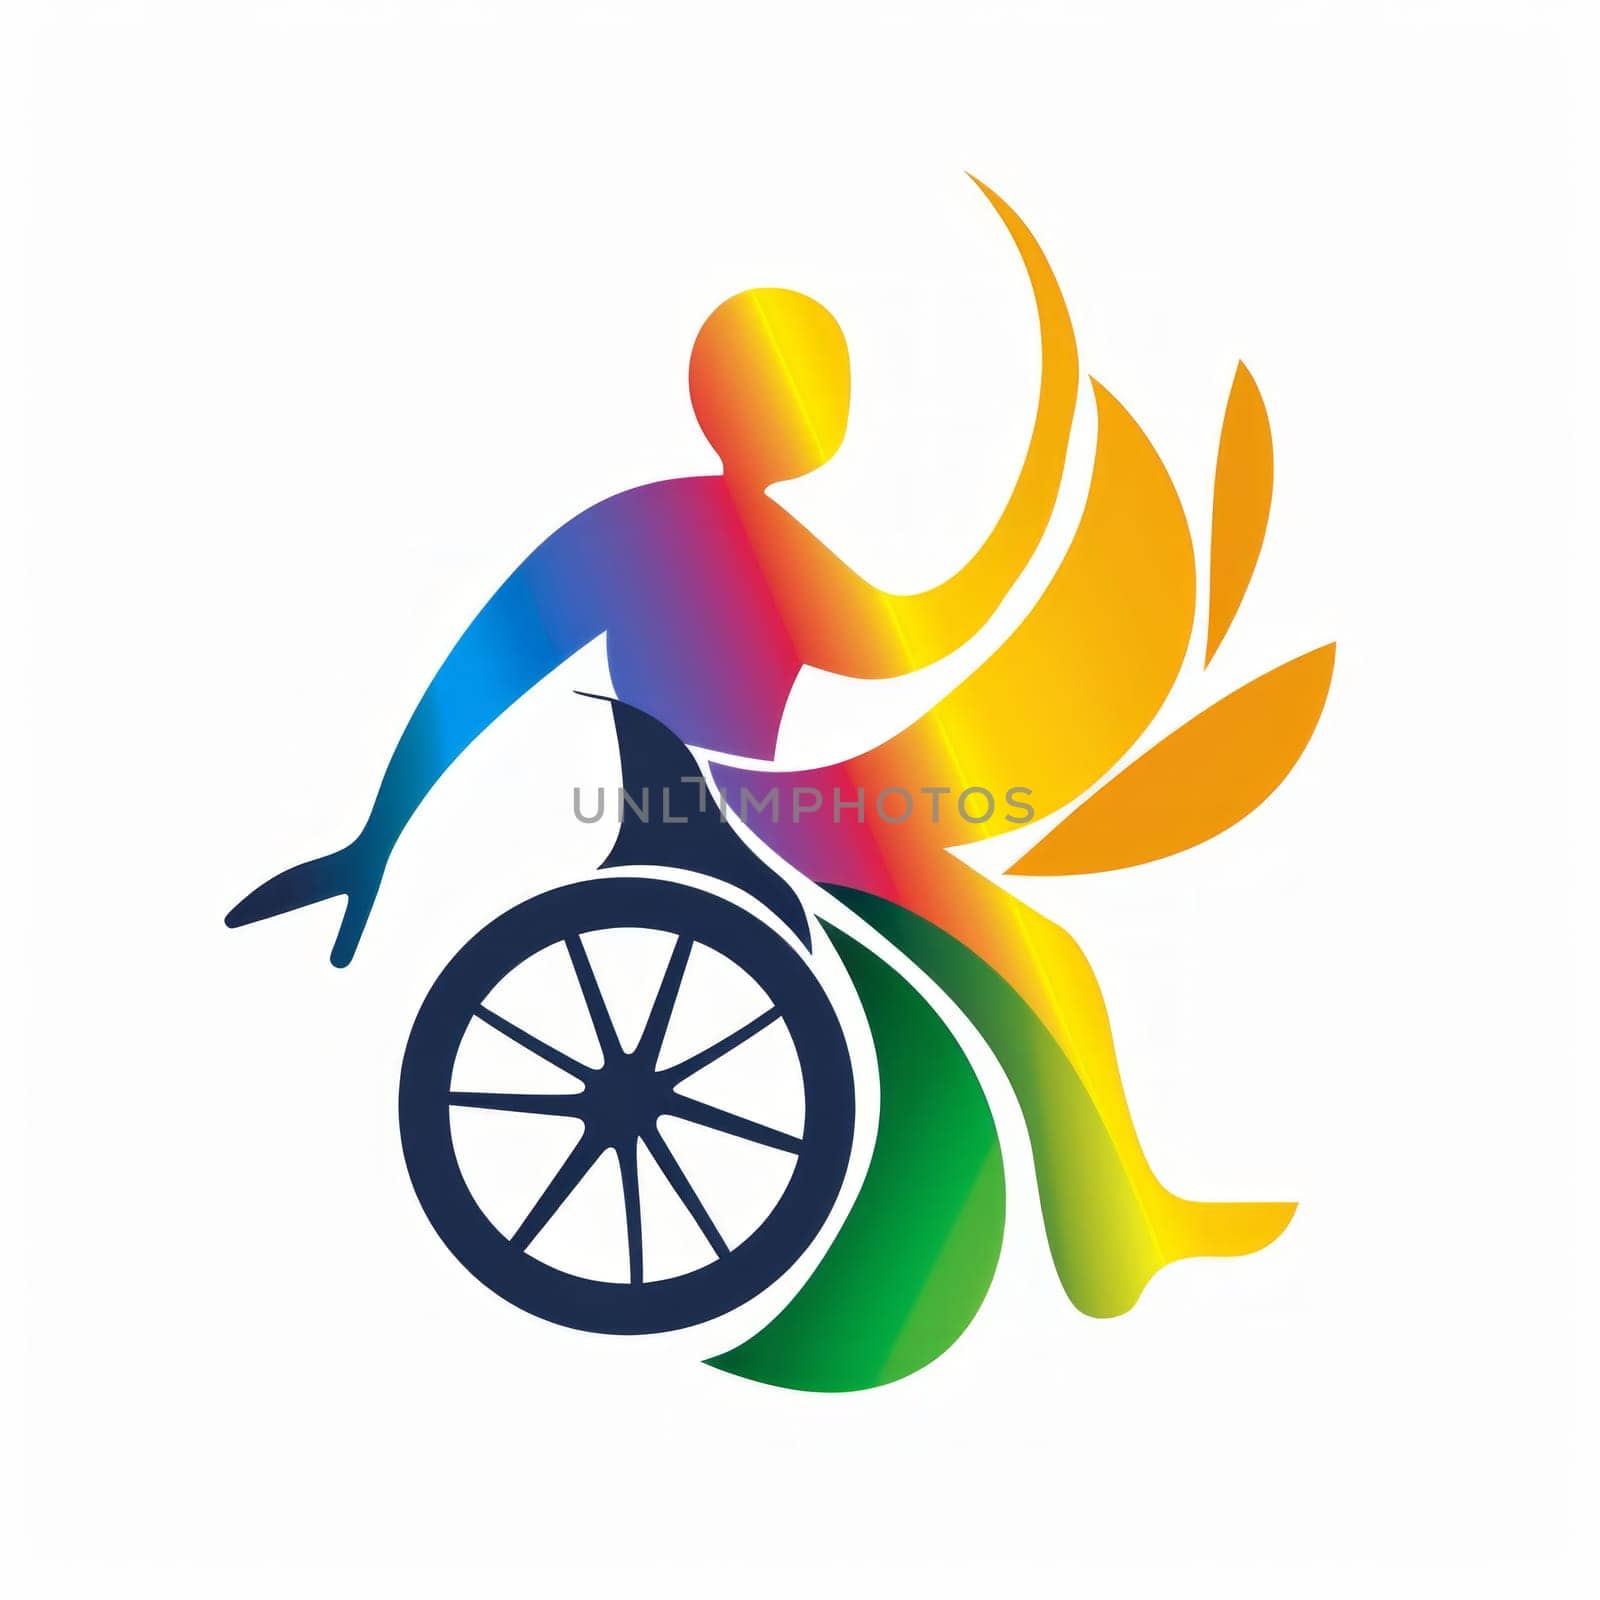 disabled people sport logo isolated on white background by papatonic